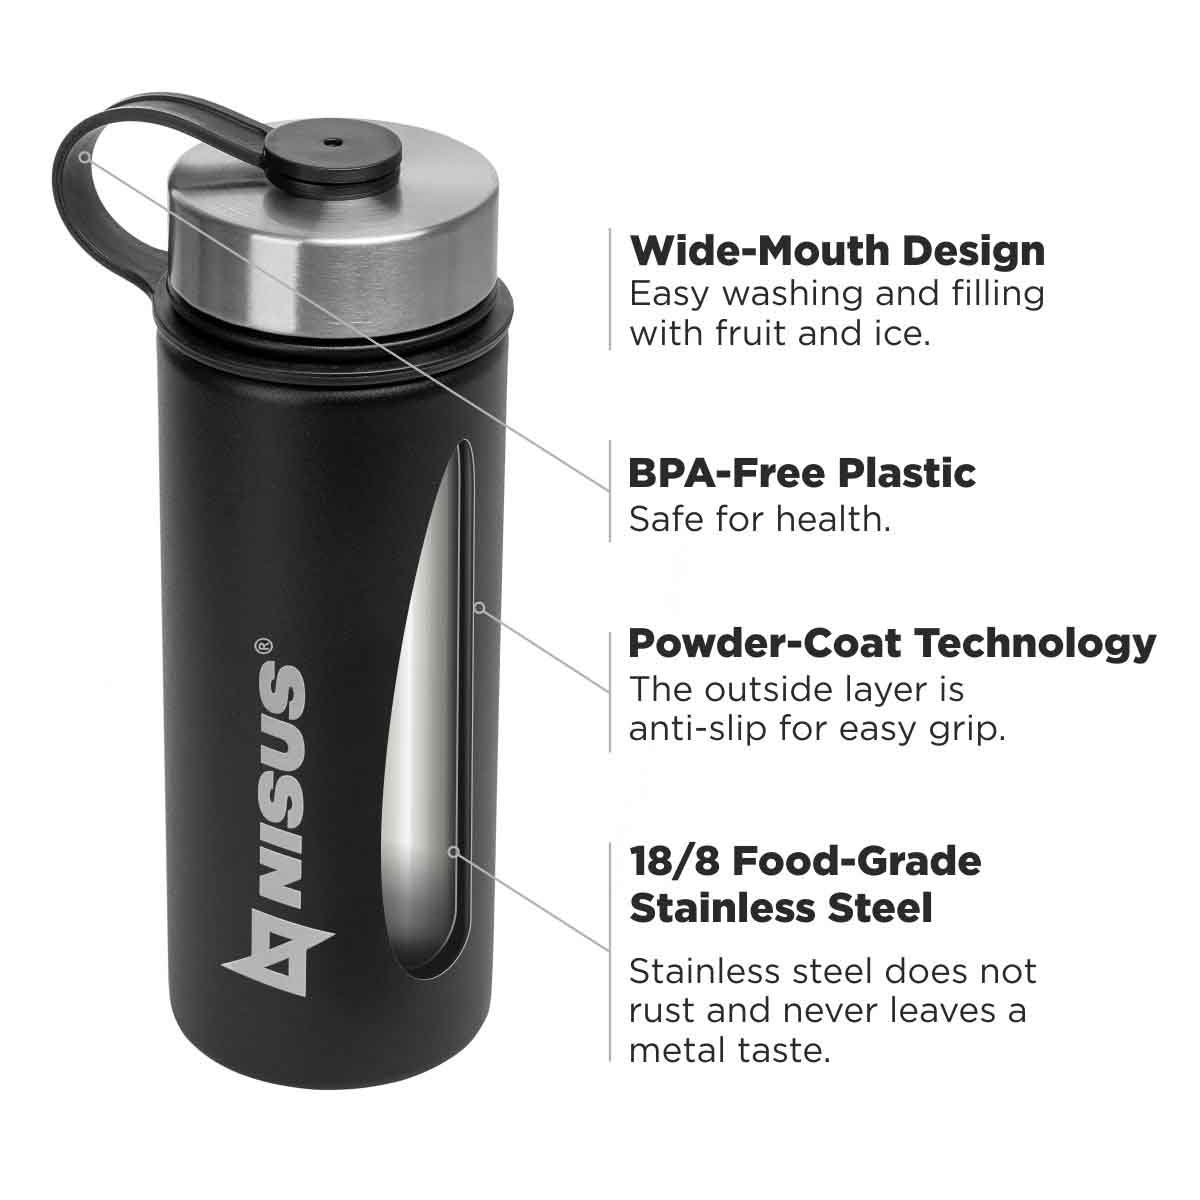 18oz Insulated Water Bottle with Straw - Powder Coated Black